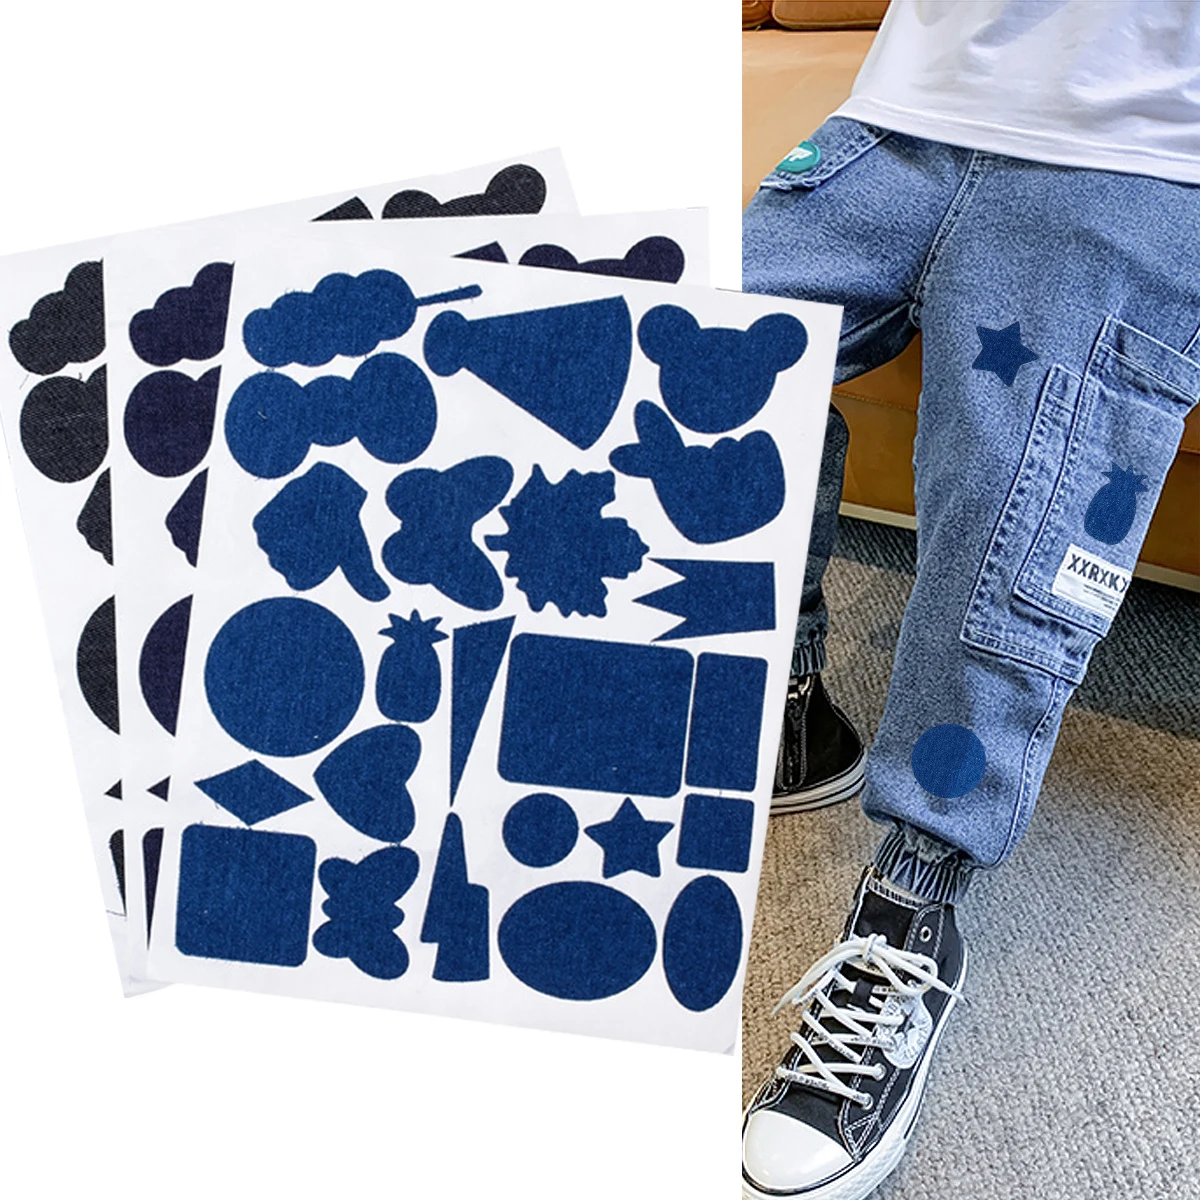 20x25cm Self Adhesive Imitation Denim Cloth Patch For Kids Clothes Trousers, Repair T-Shirt Jean Jacket Shorts Iron On/Sew Patch